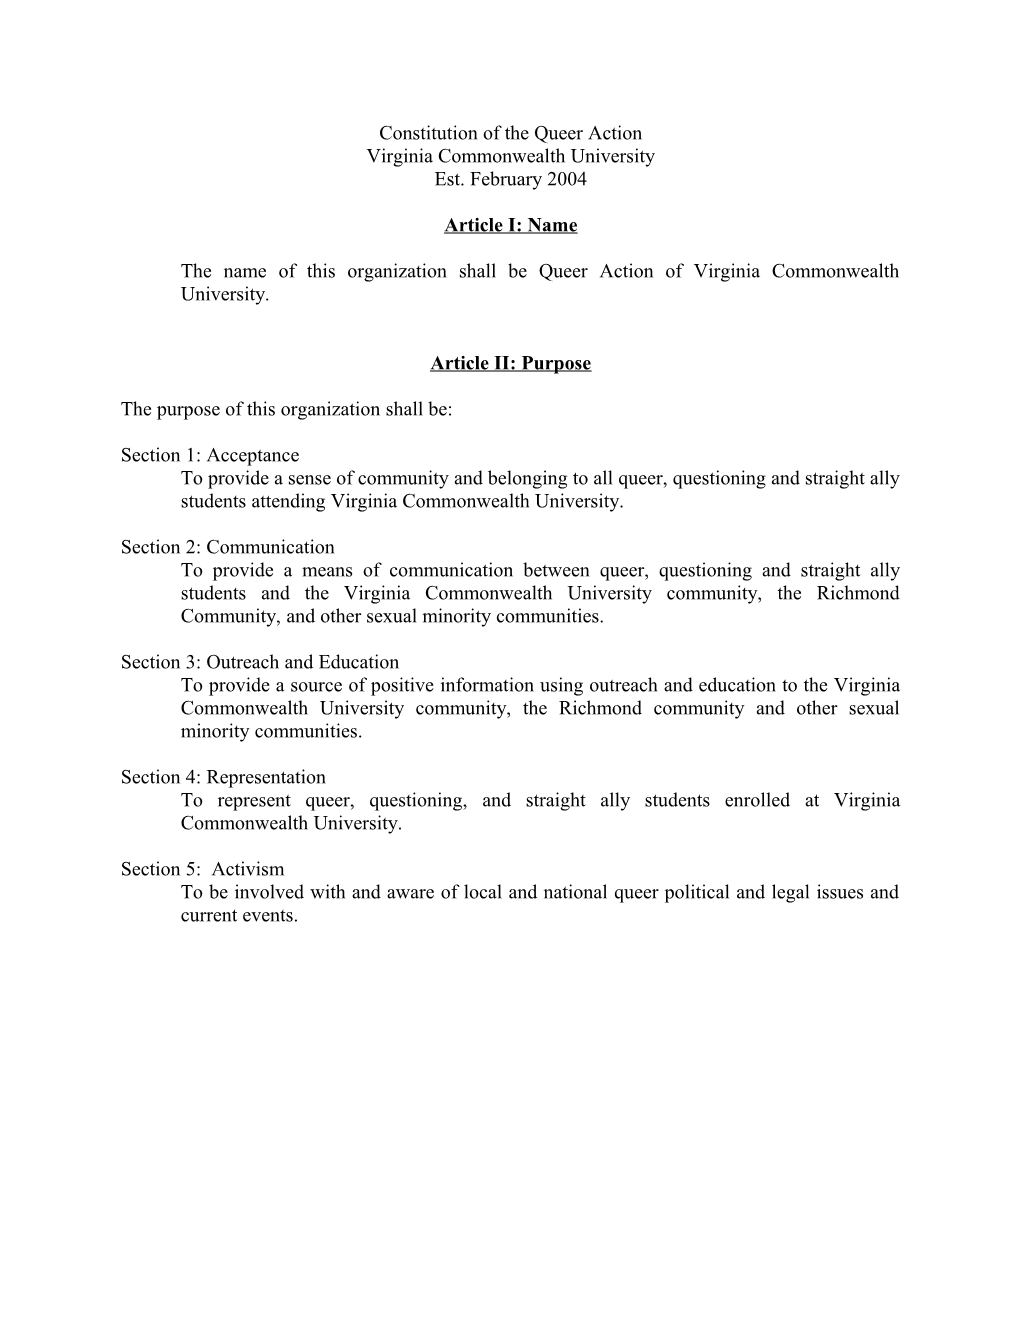 Constitution of the Sexual Minority Student Alliance